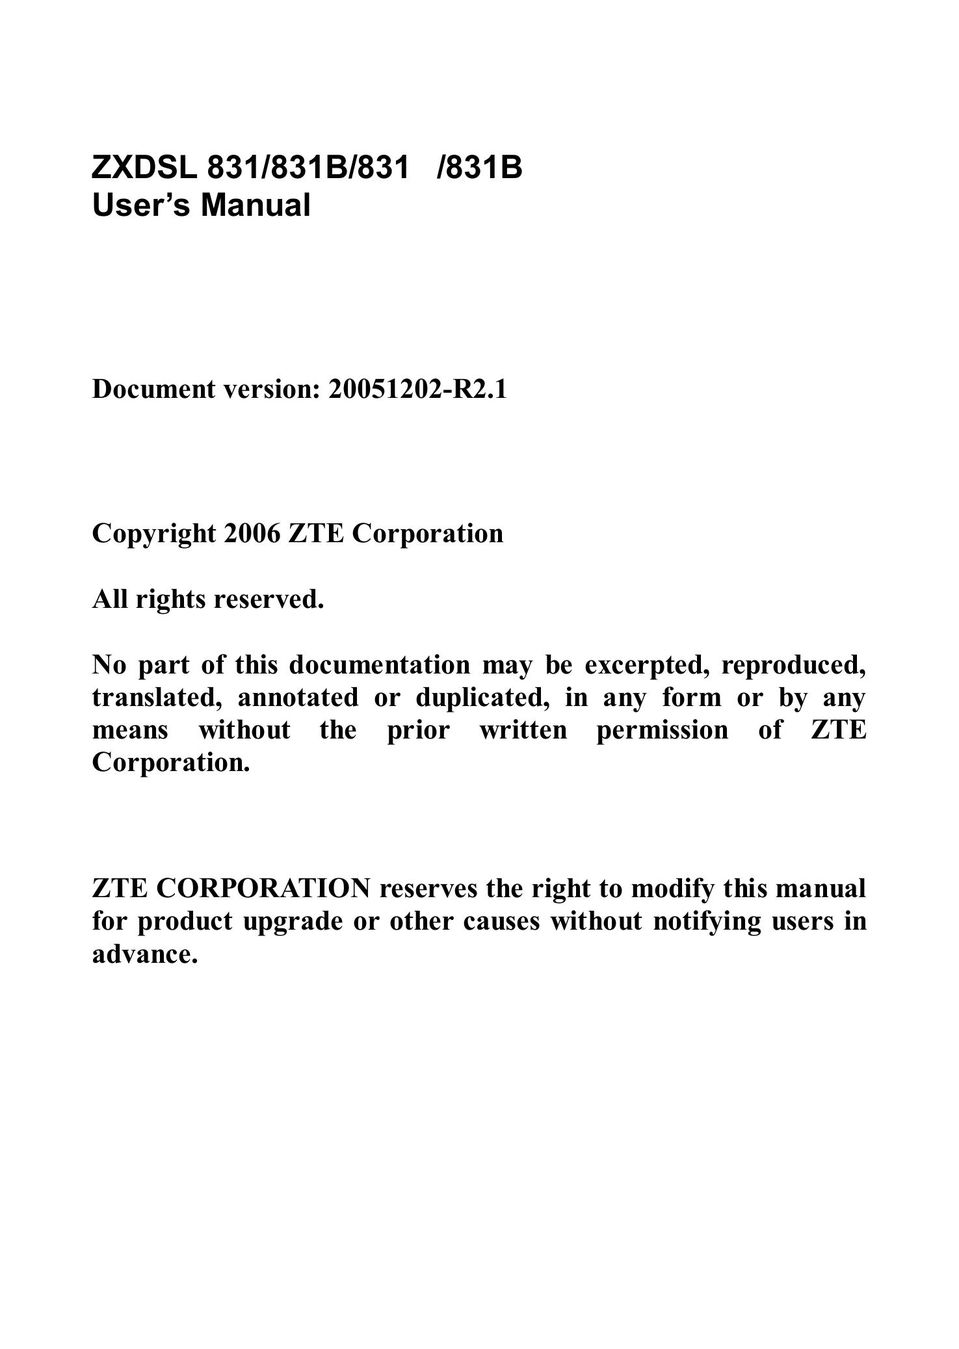 ZTE ZXDSL 831 Network Router User Manual